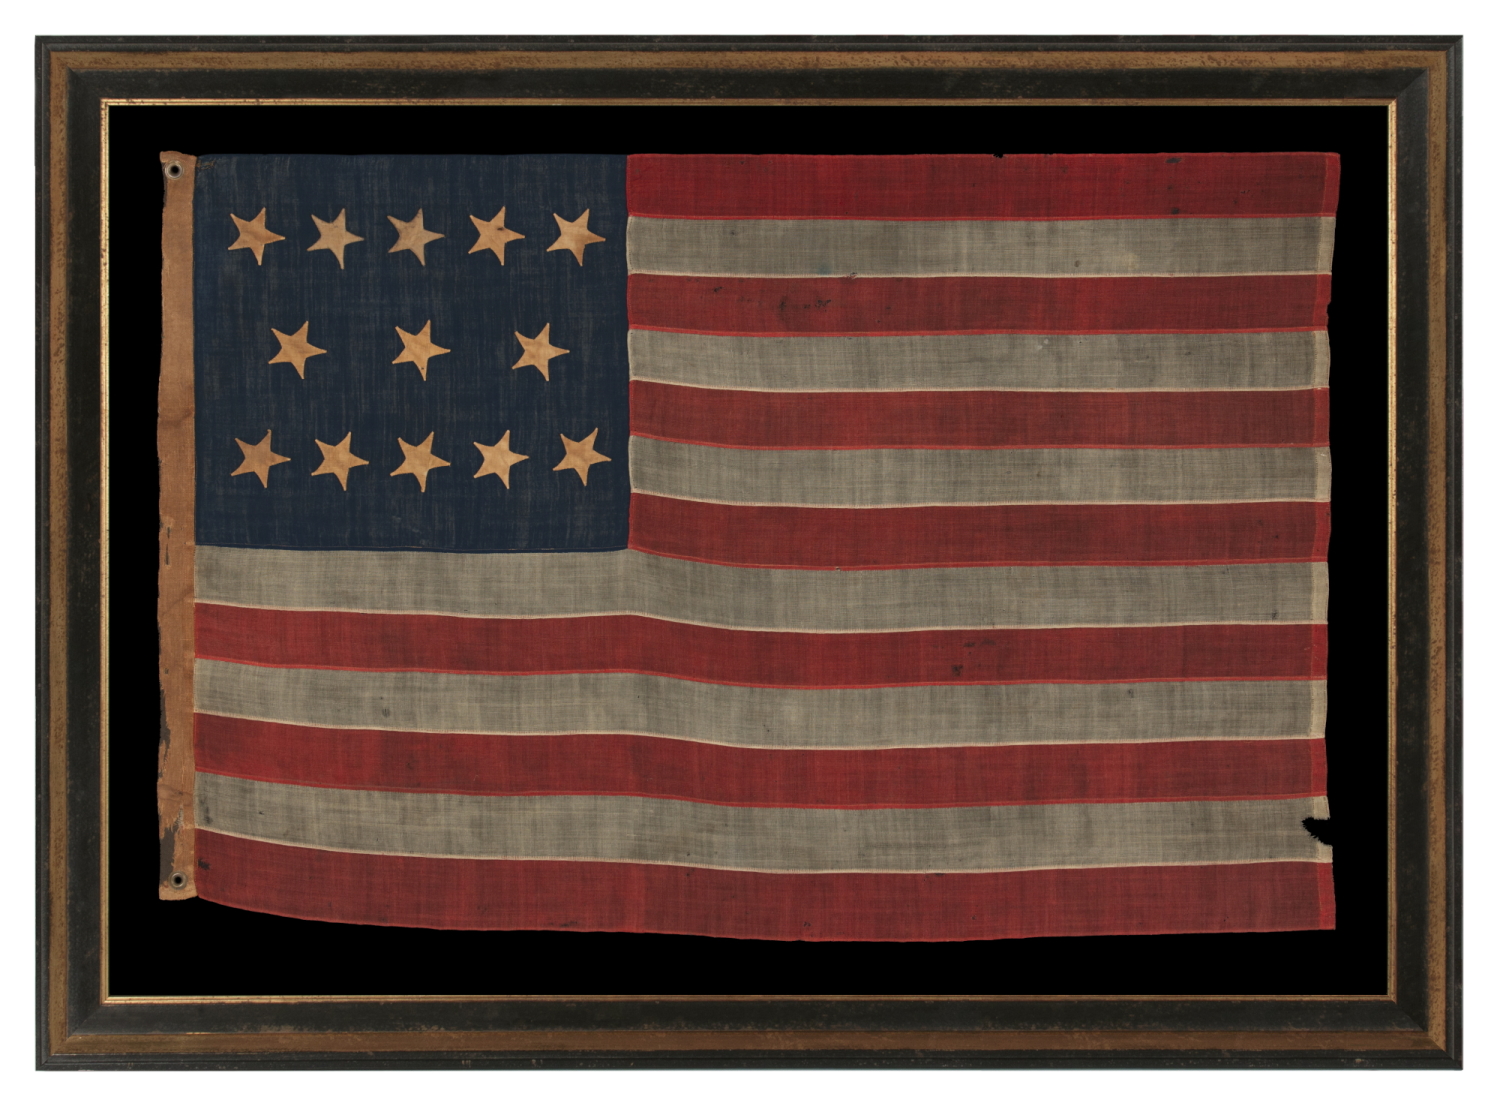 ANTIQUE AMERICAN FLAG WITH 13 HAND-SEWN STARS IN AN EXTREMELY RARE LINEAL CONFIGURATION OF 5-3-5, PROBABLY MADE WITH THE INTENT OF USE BY LOCAL MILITIA OR PRIVATE OUTFITTING OF A VOLUNTEER COMPANY, CIVIL WAR PERIOD, 1861-1865; EXHIBITED AT THE MUSEUM OF THE AMERICAN REVOLUTION FROM JUNE – JULY, 2019